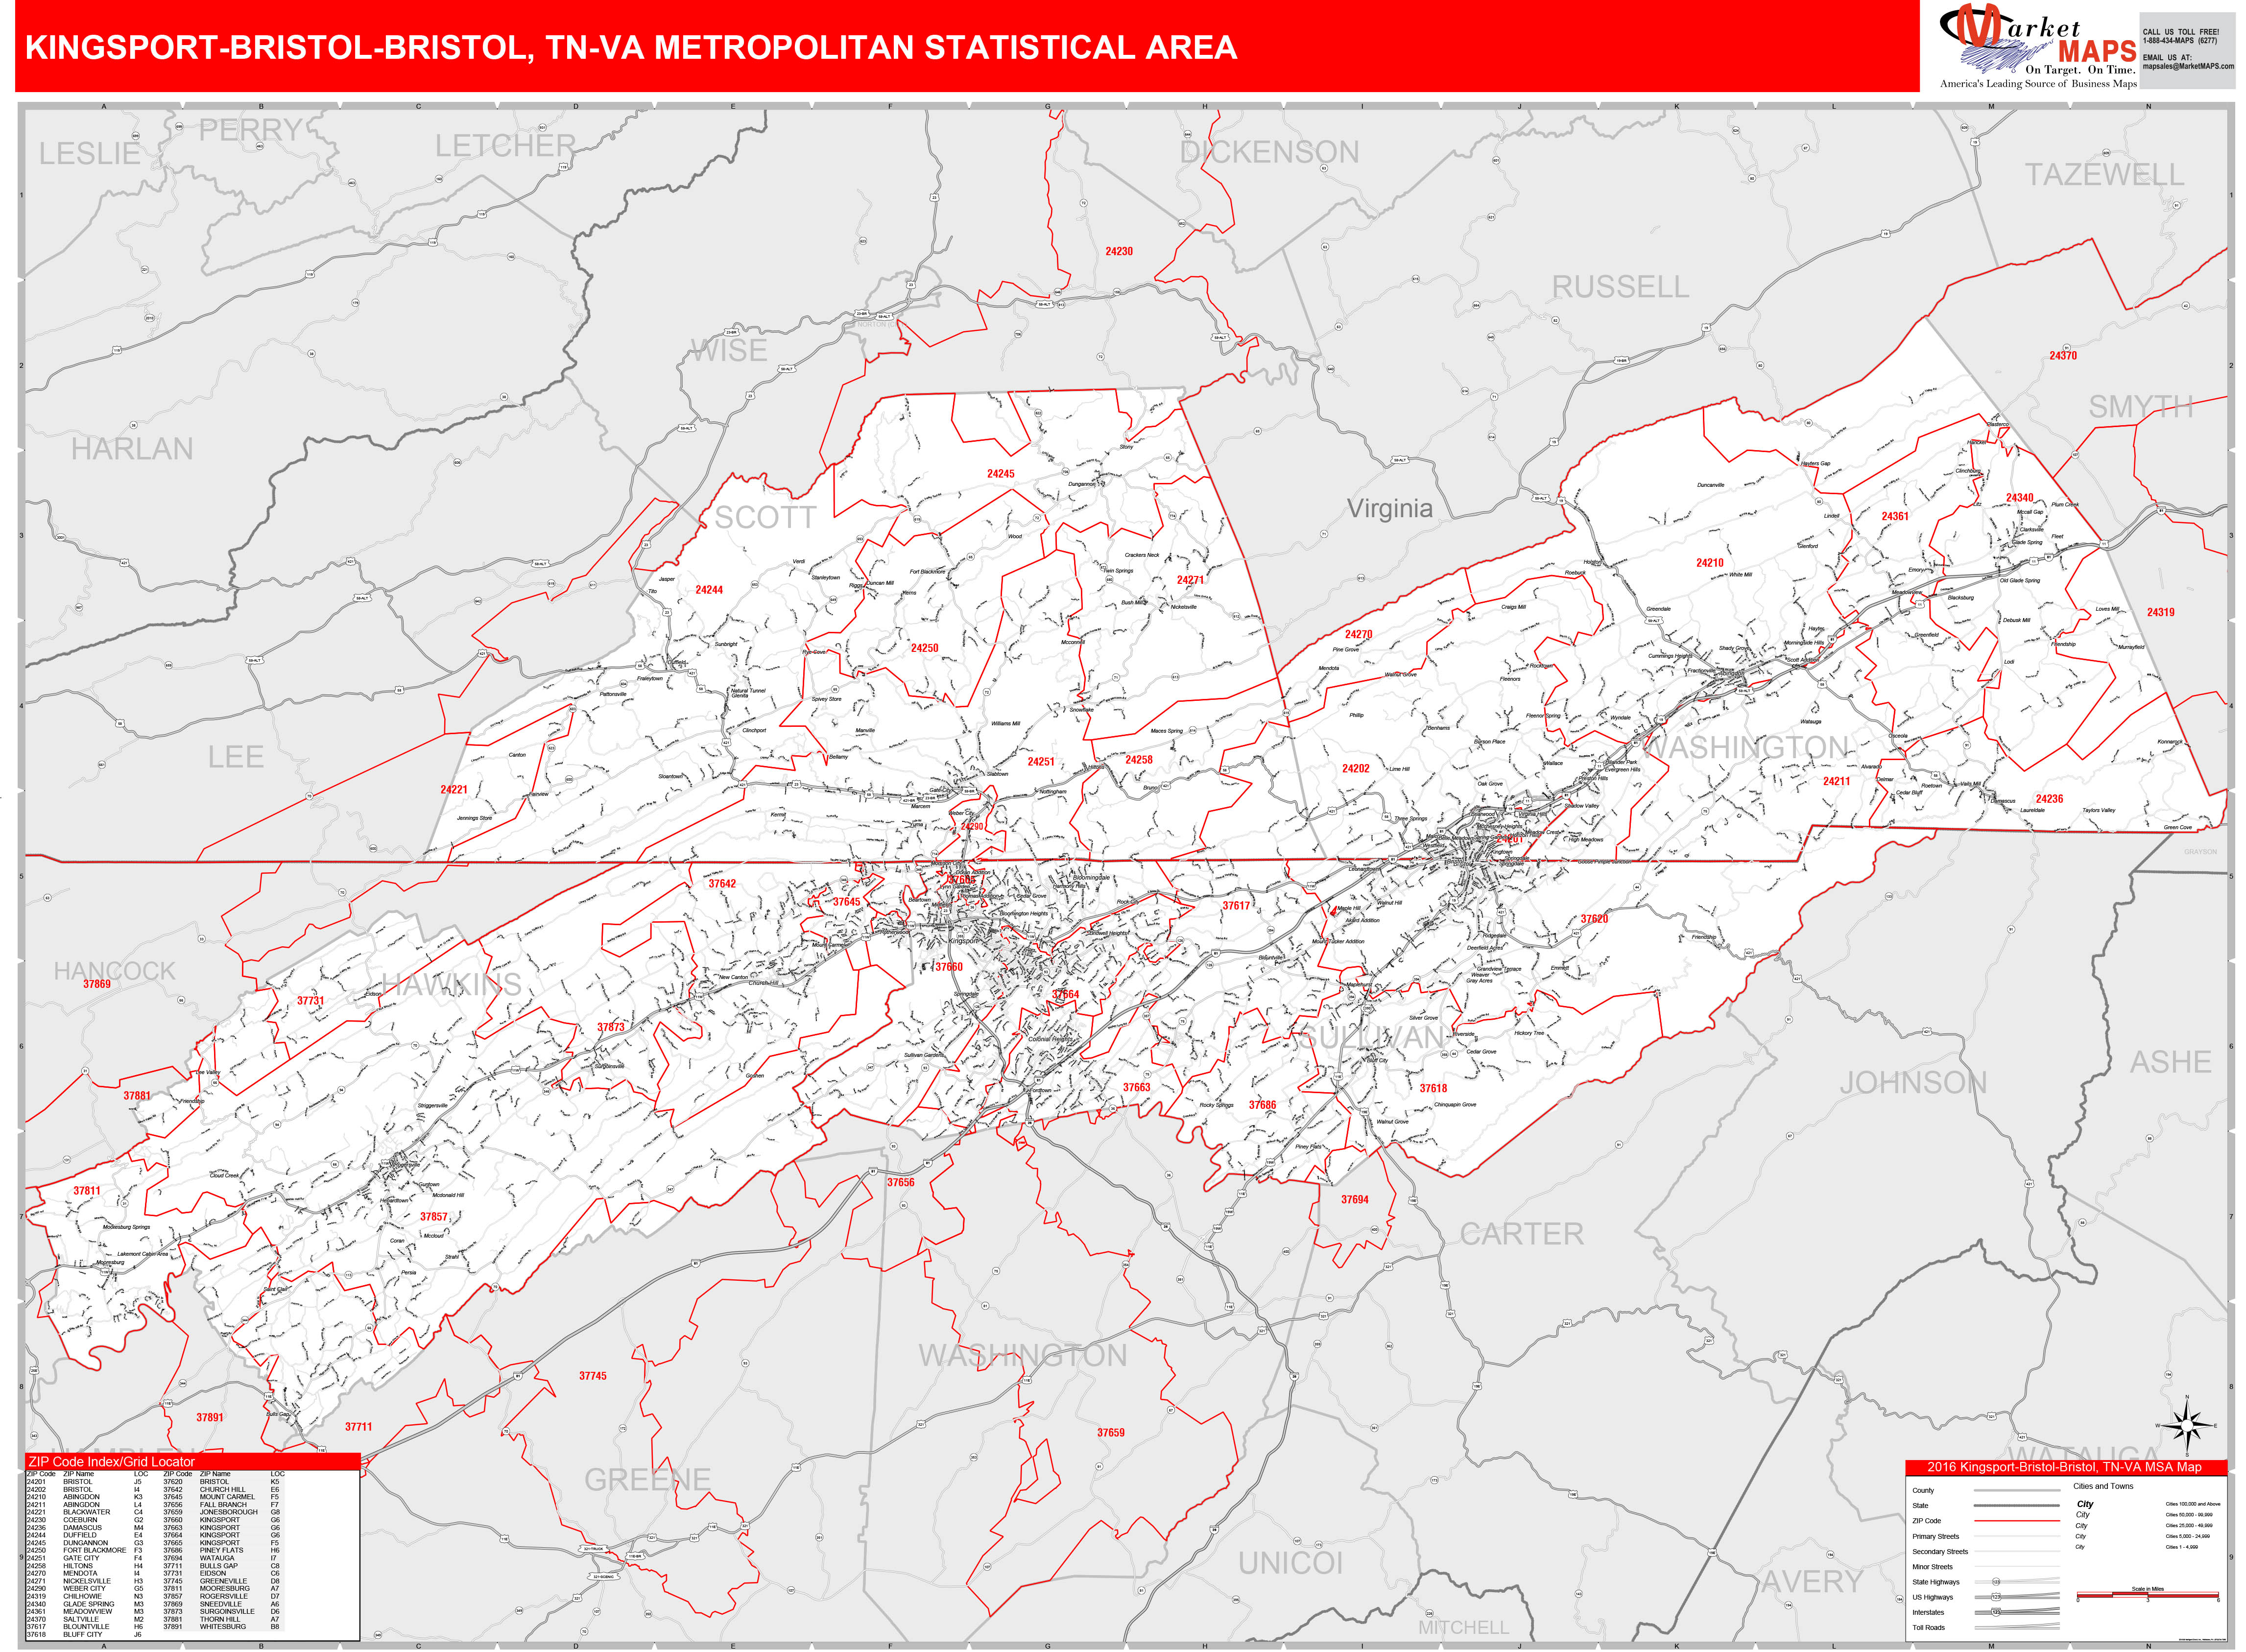 Kingsport-Bristol-Bristol, TN Metro Area Wall Map Red Line Style by ...